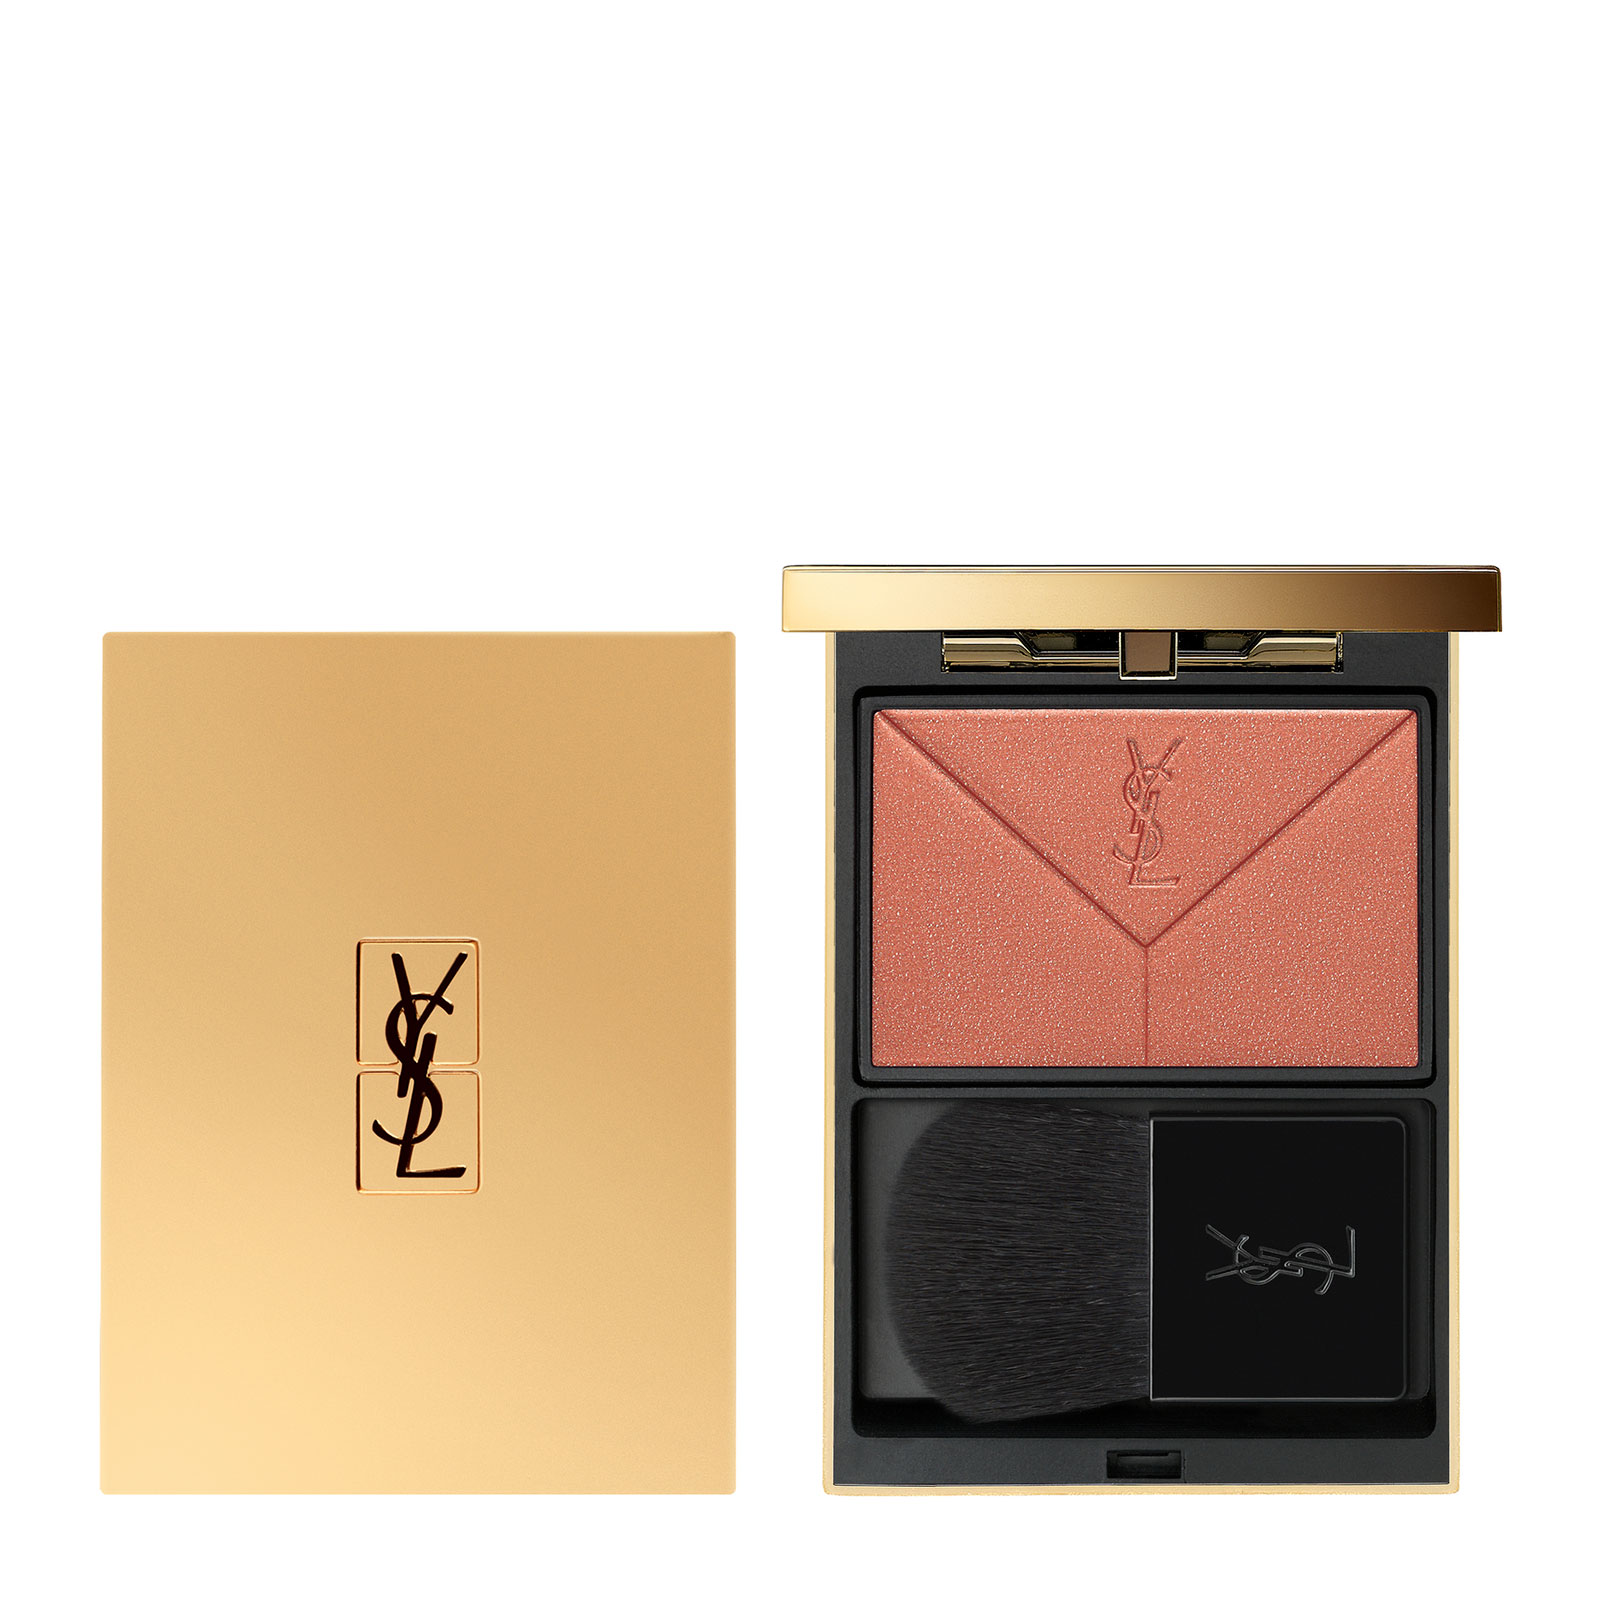 Ysl Beauty Couture Blush 3G N5 Nude Blouse